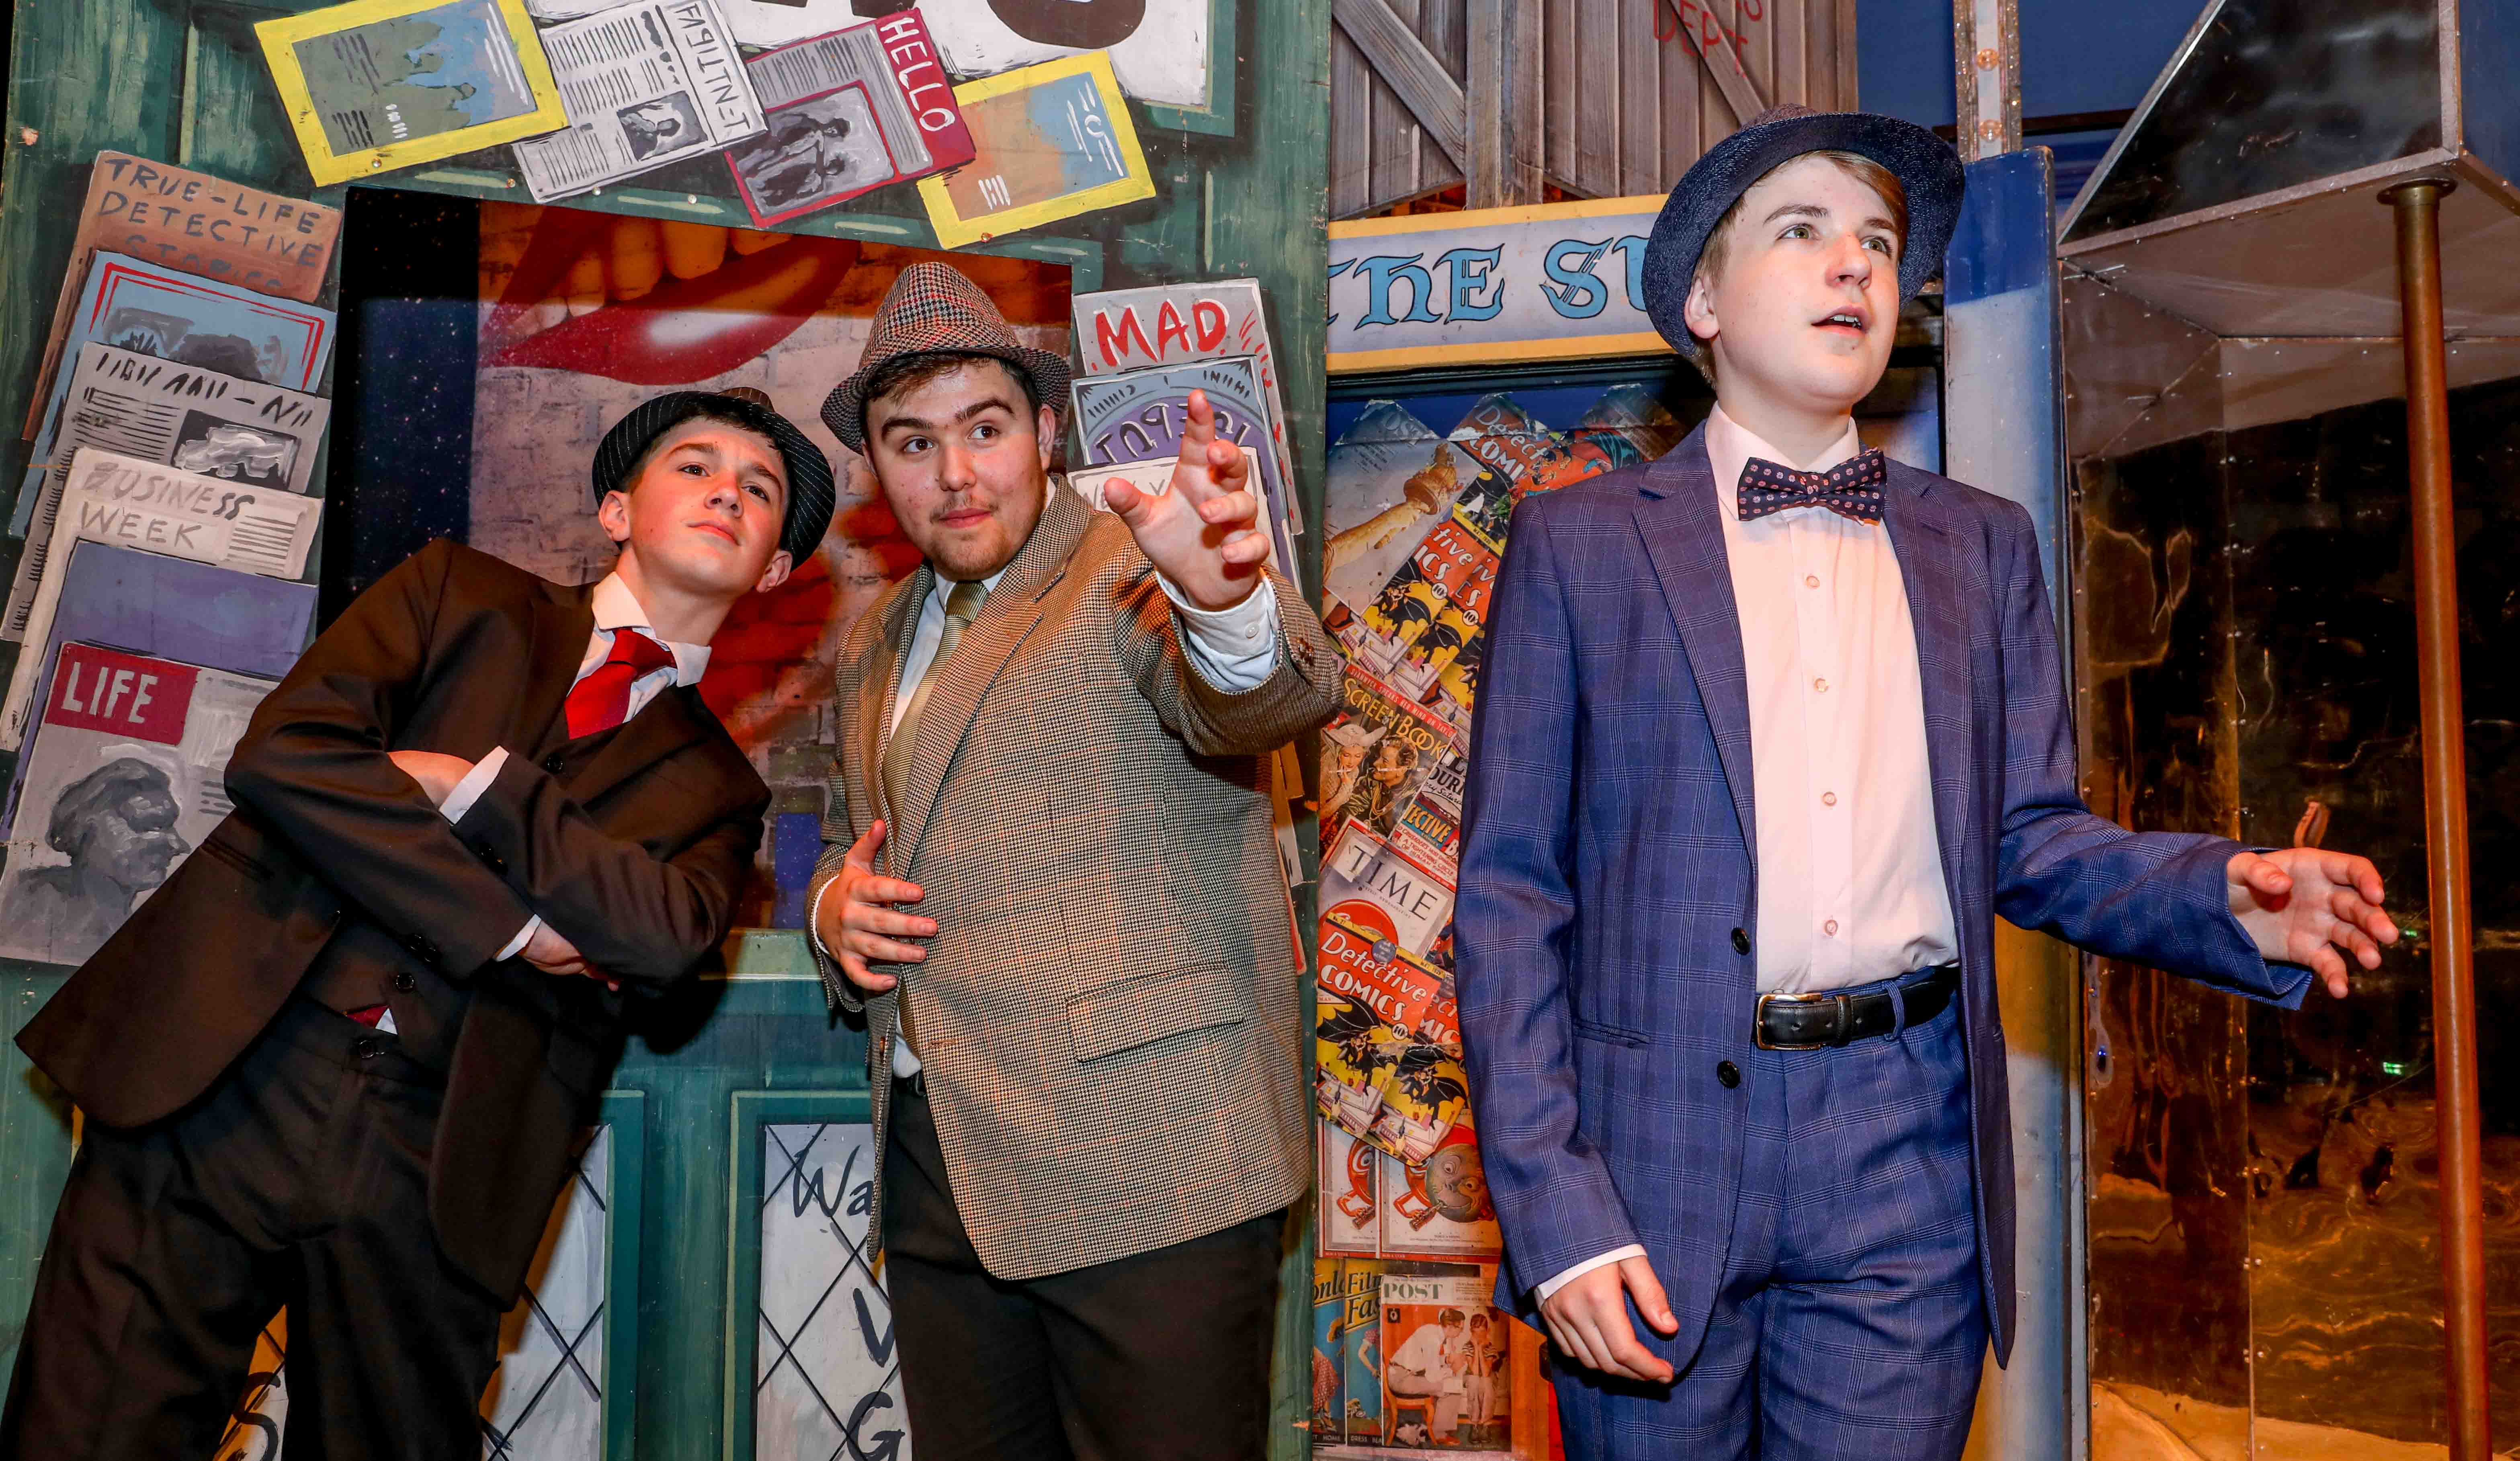 Barnstorming performance of Broadway hit Guys and Dolls